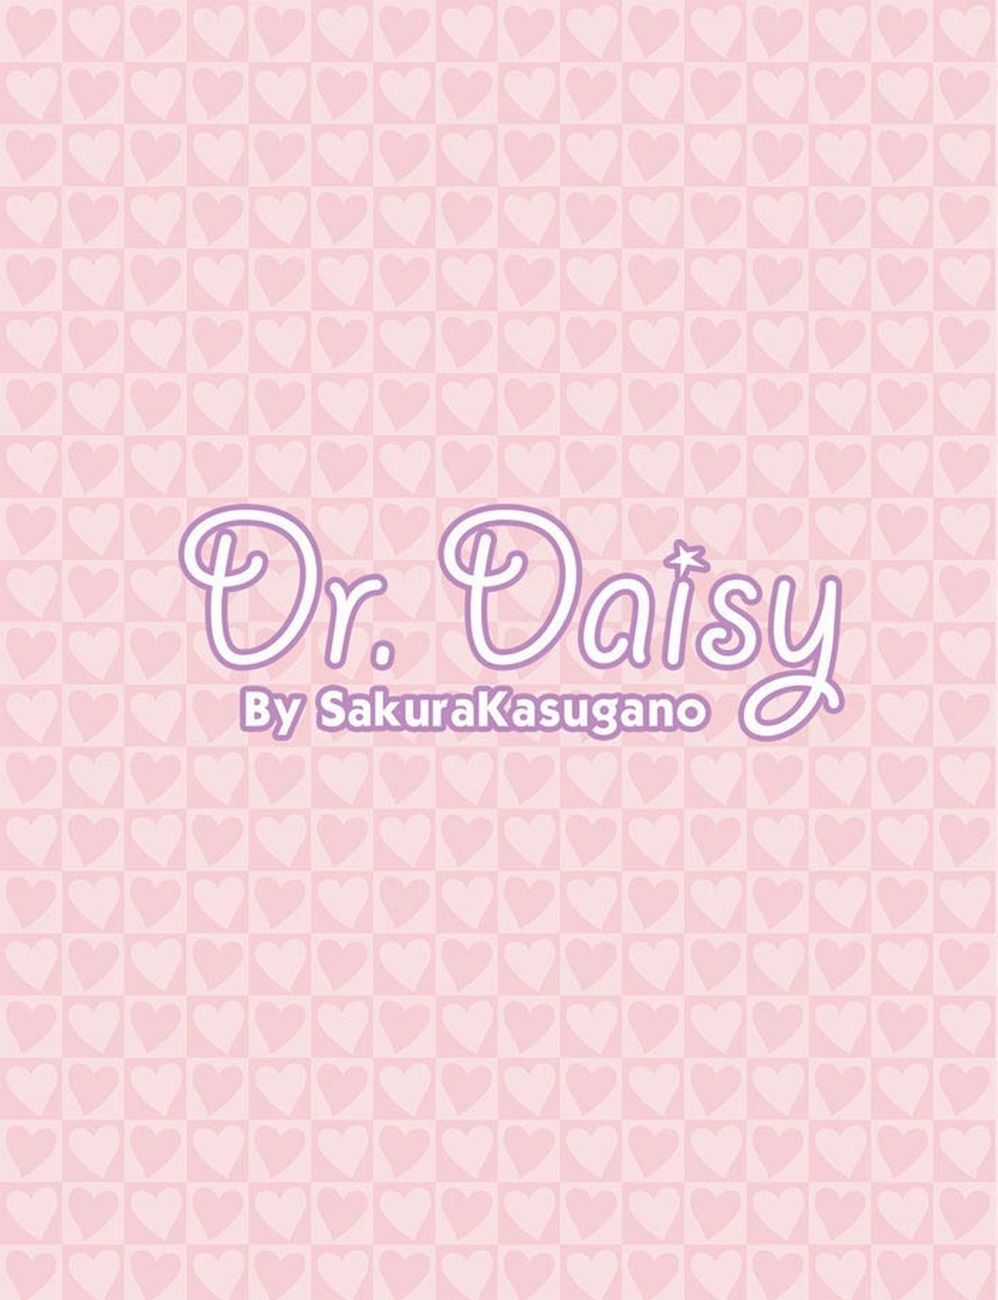 Dr. Daisy page 1